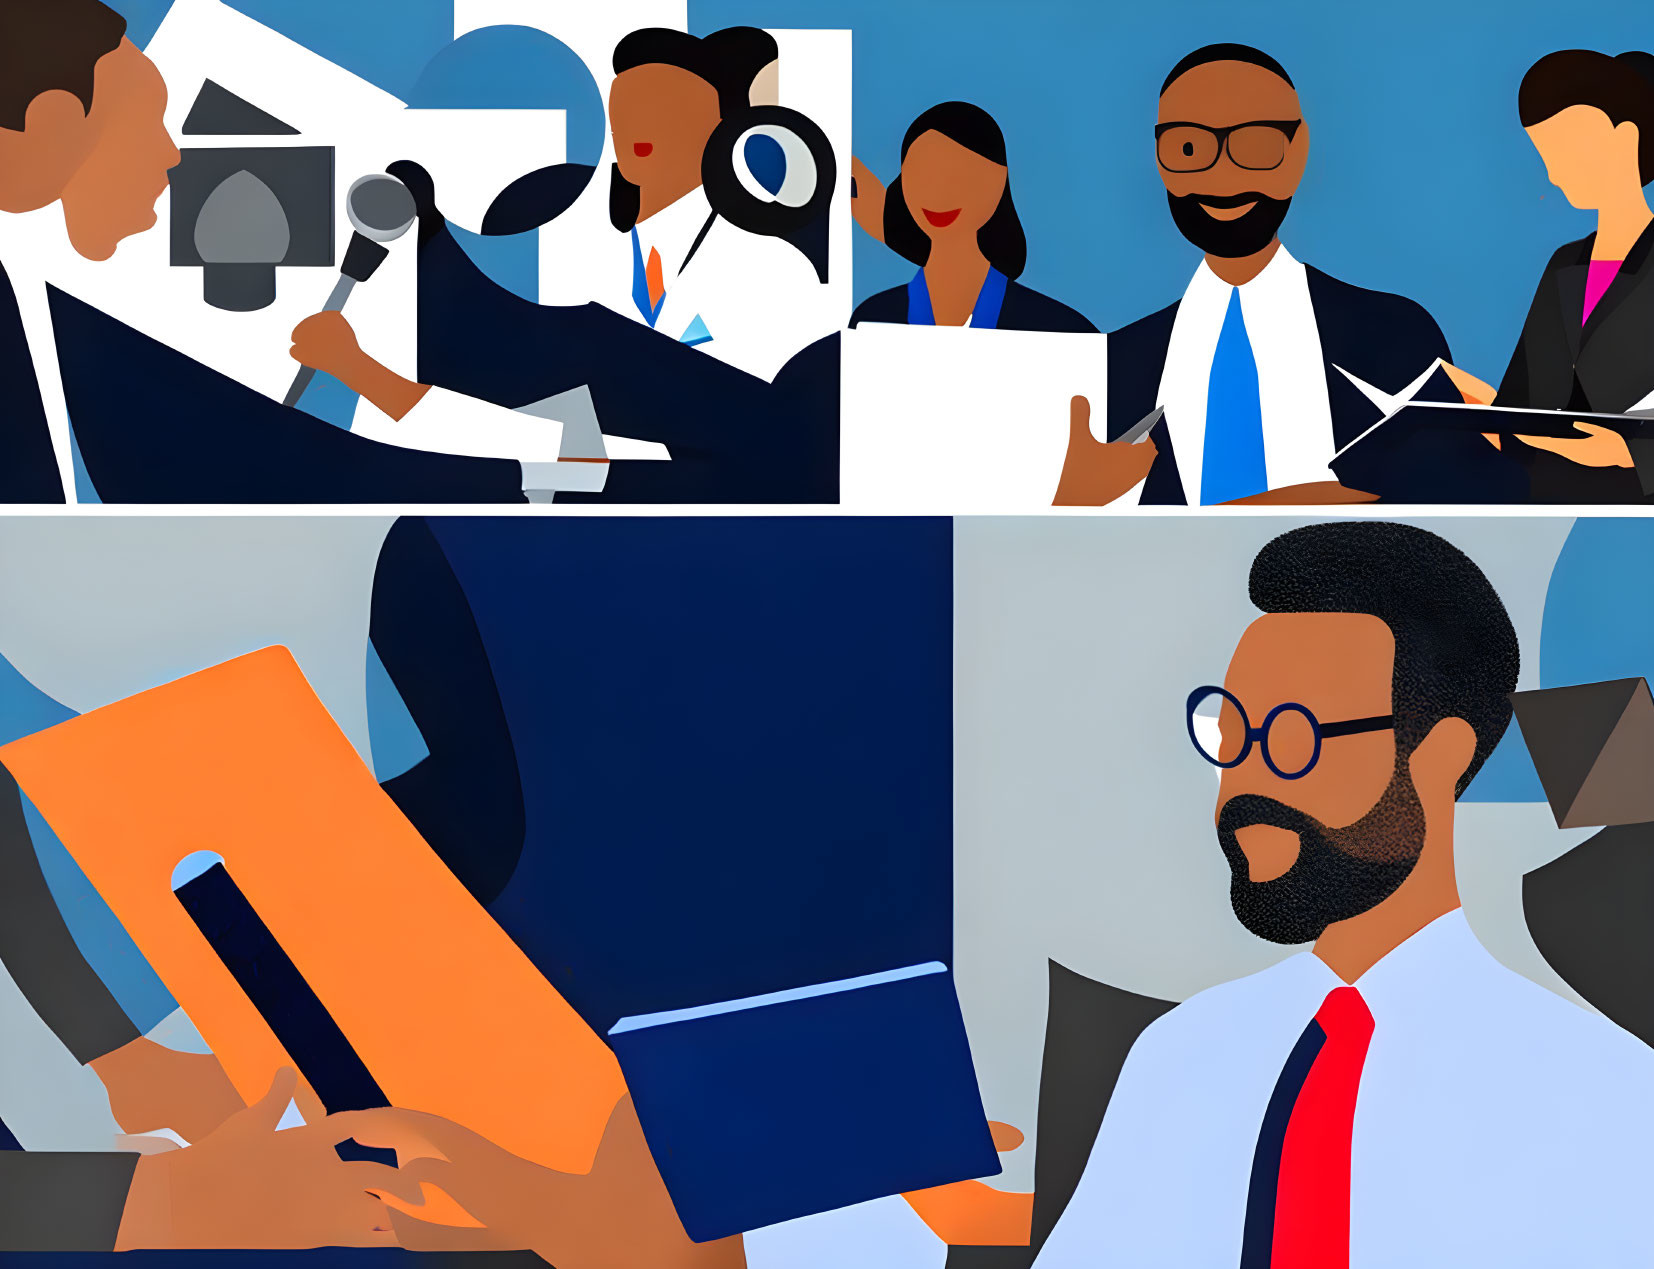 Professional Scenarios Illustration Featuring Broadcasting, Podcasting, Office Work, and Tablet Use